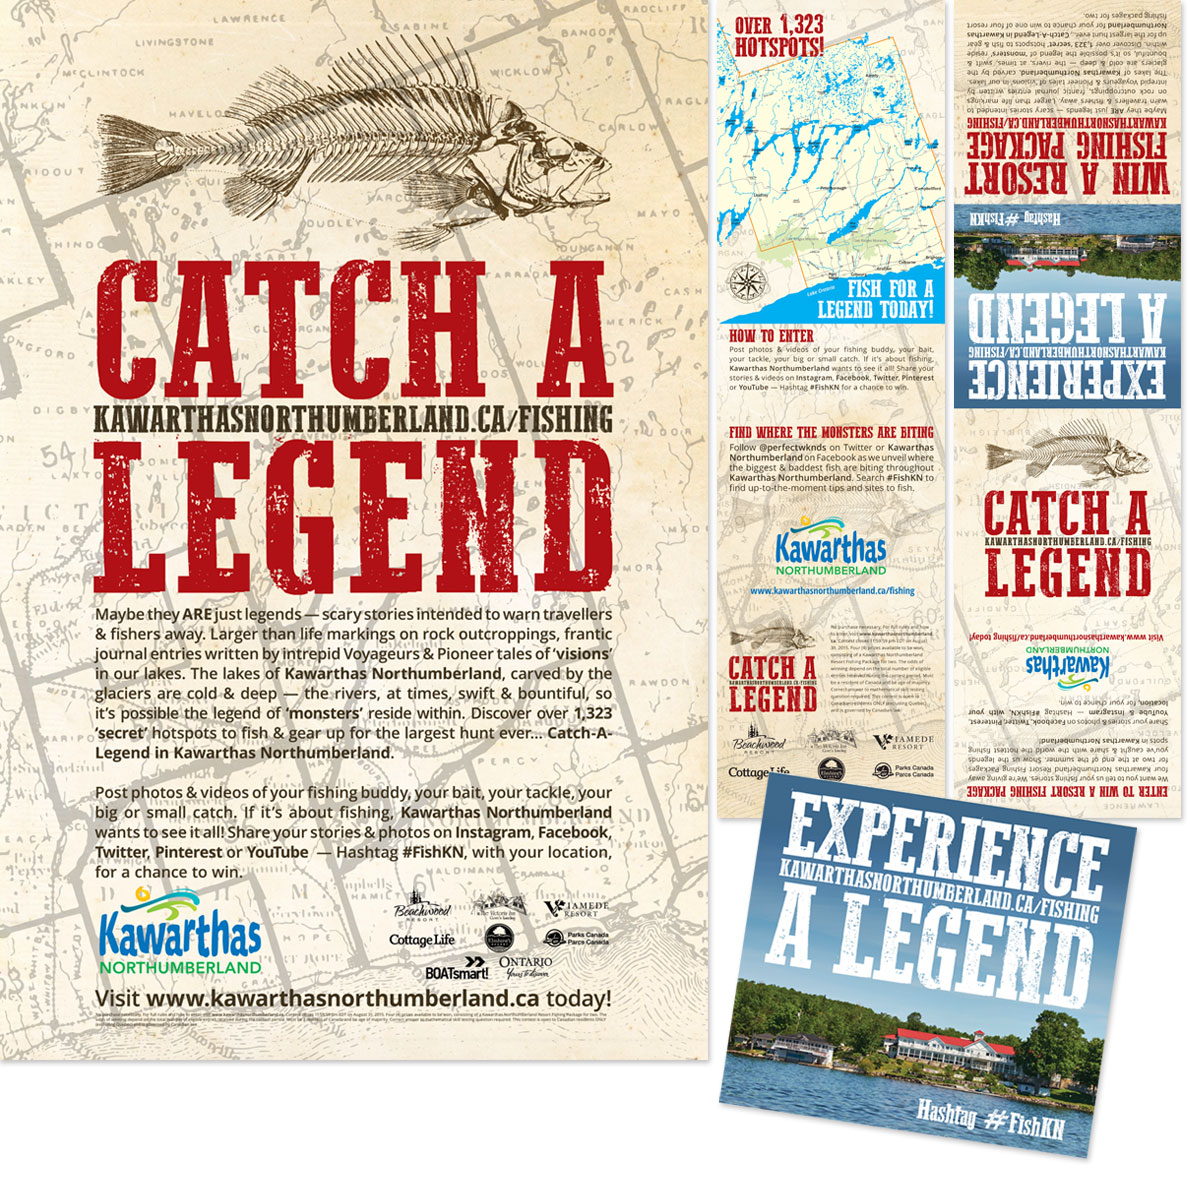 Kawarthas Northumberland - Catch A Legend - Collateral